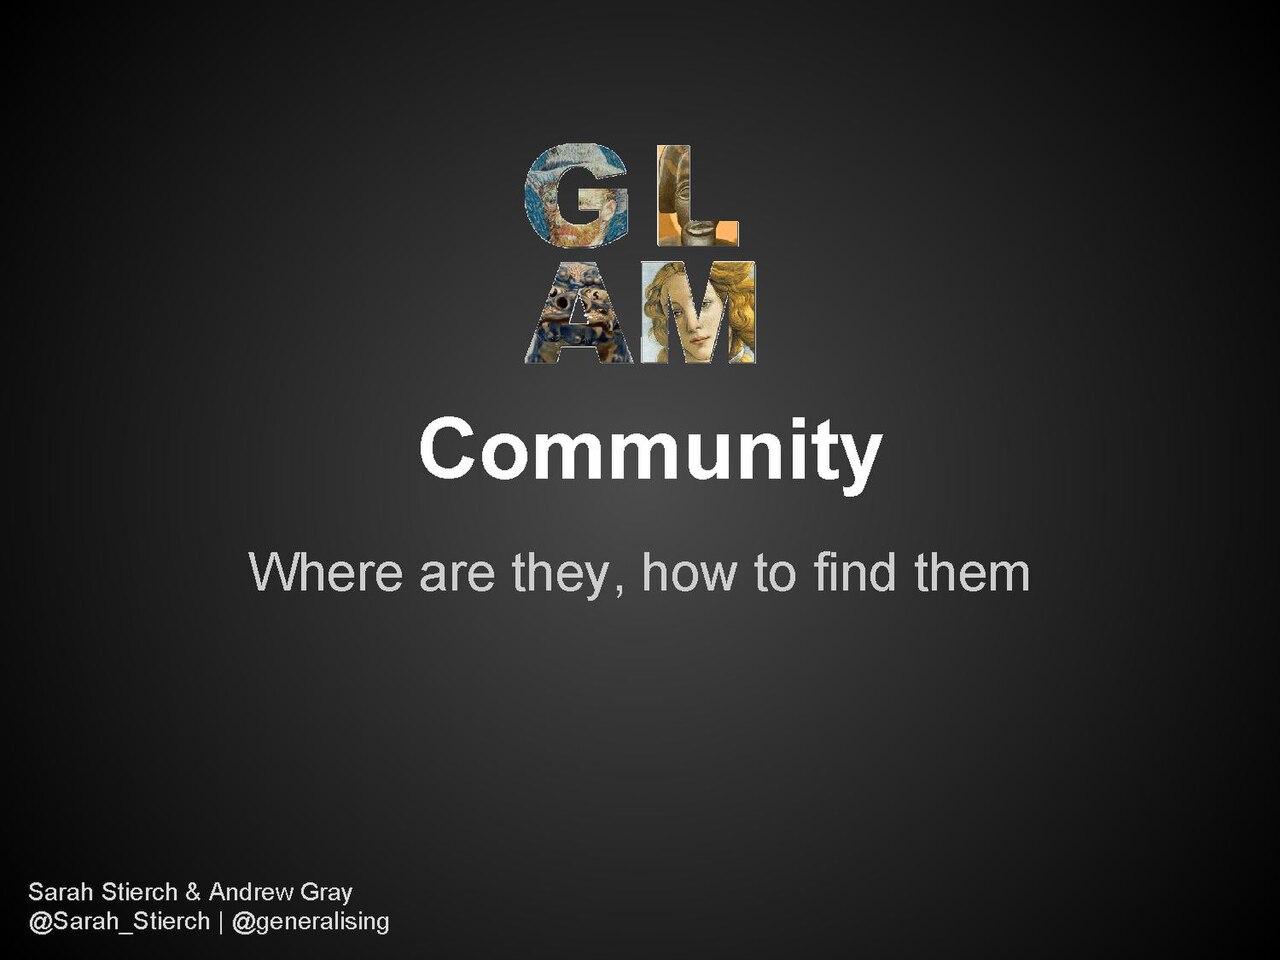 File:Finding the community.pdf